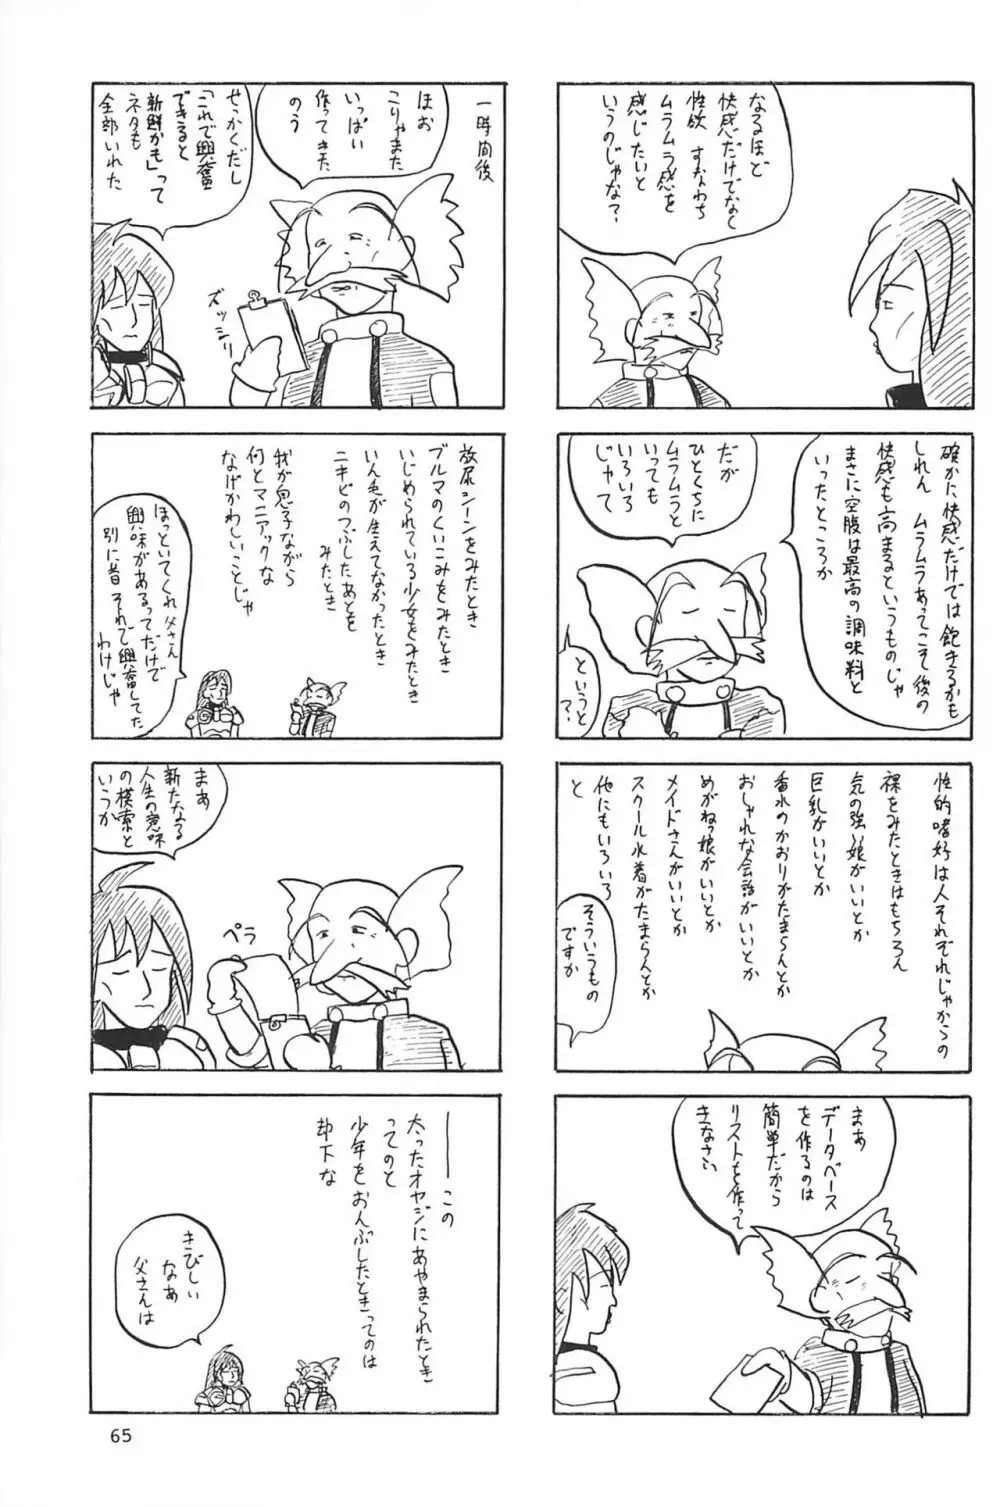 ND-special Volume 1 65ページ